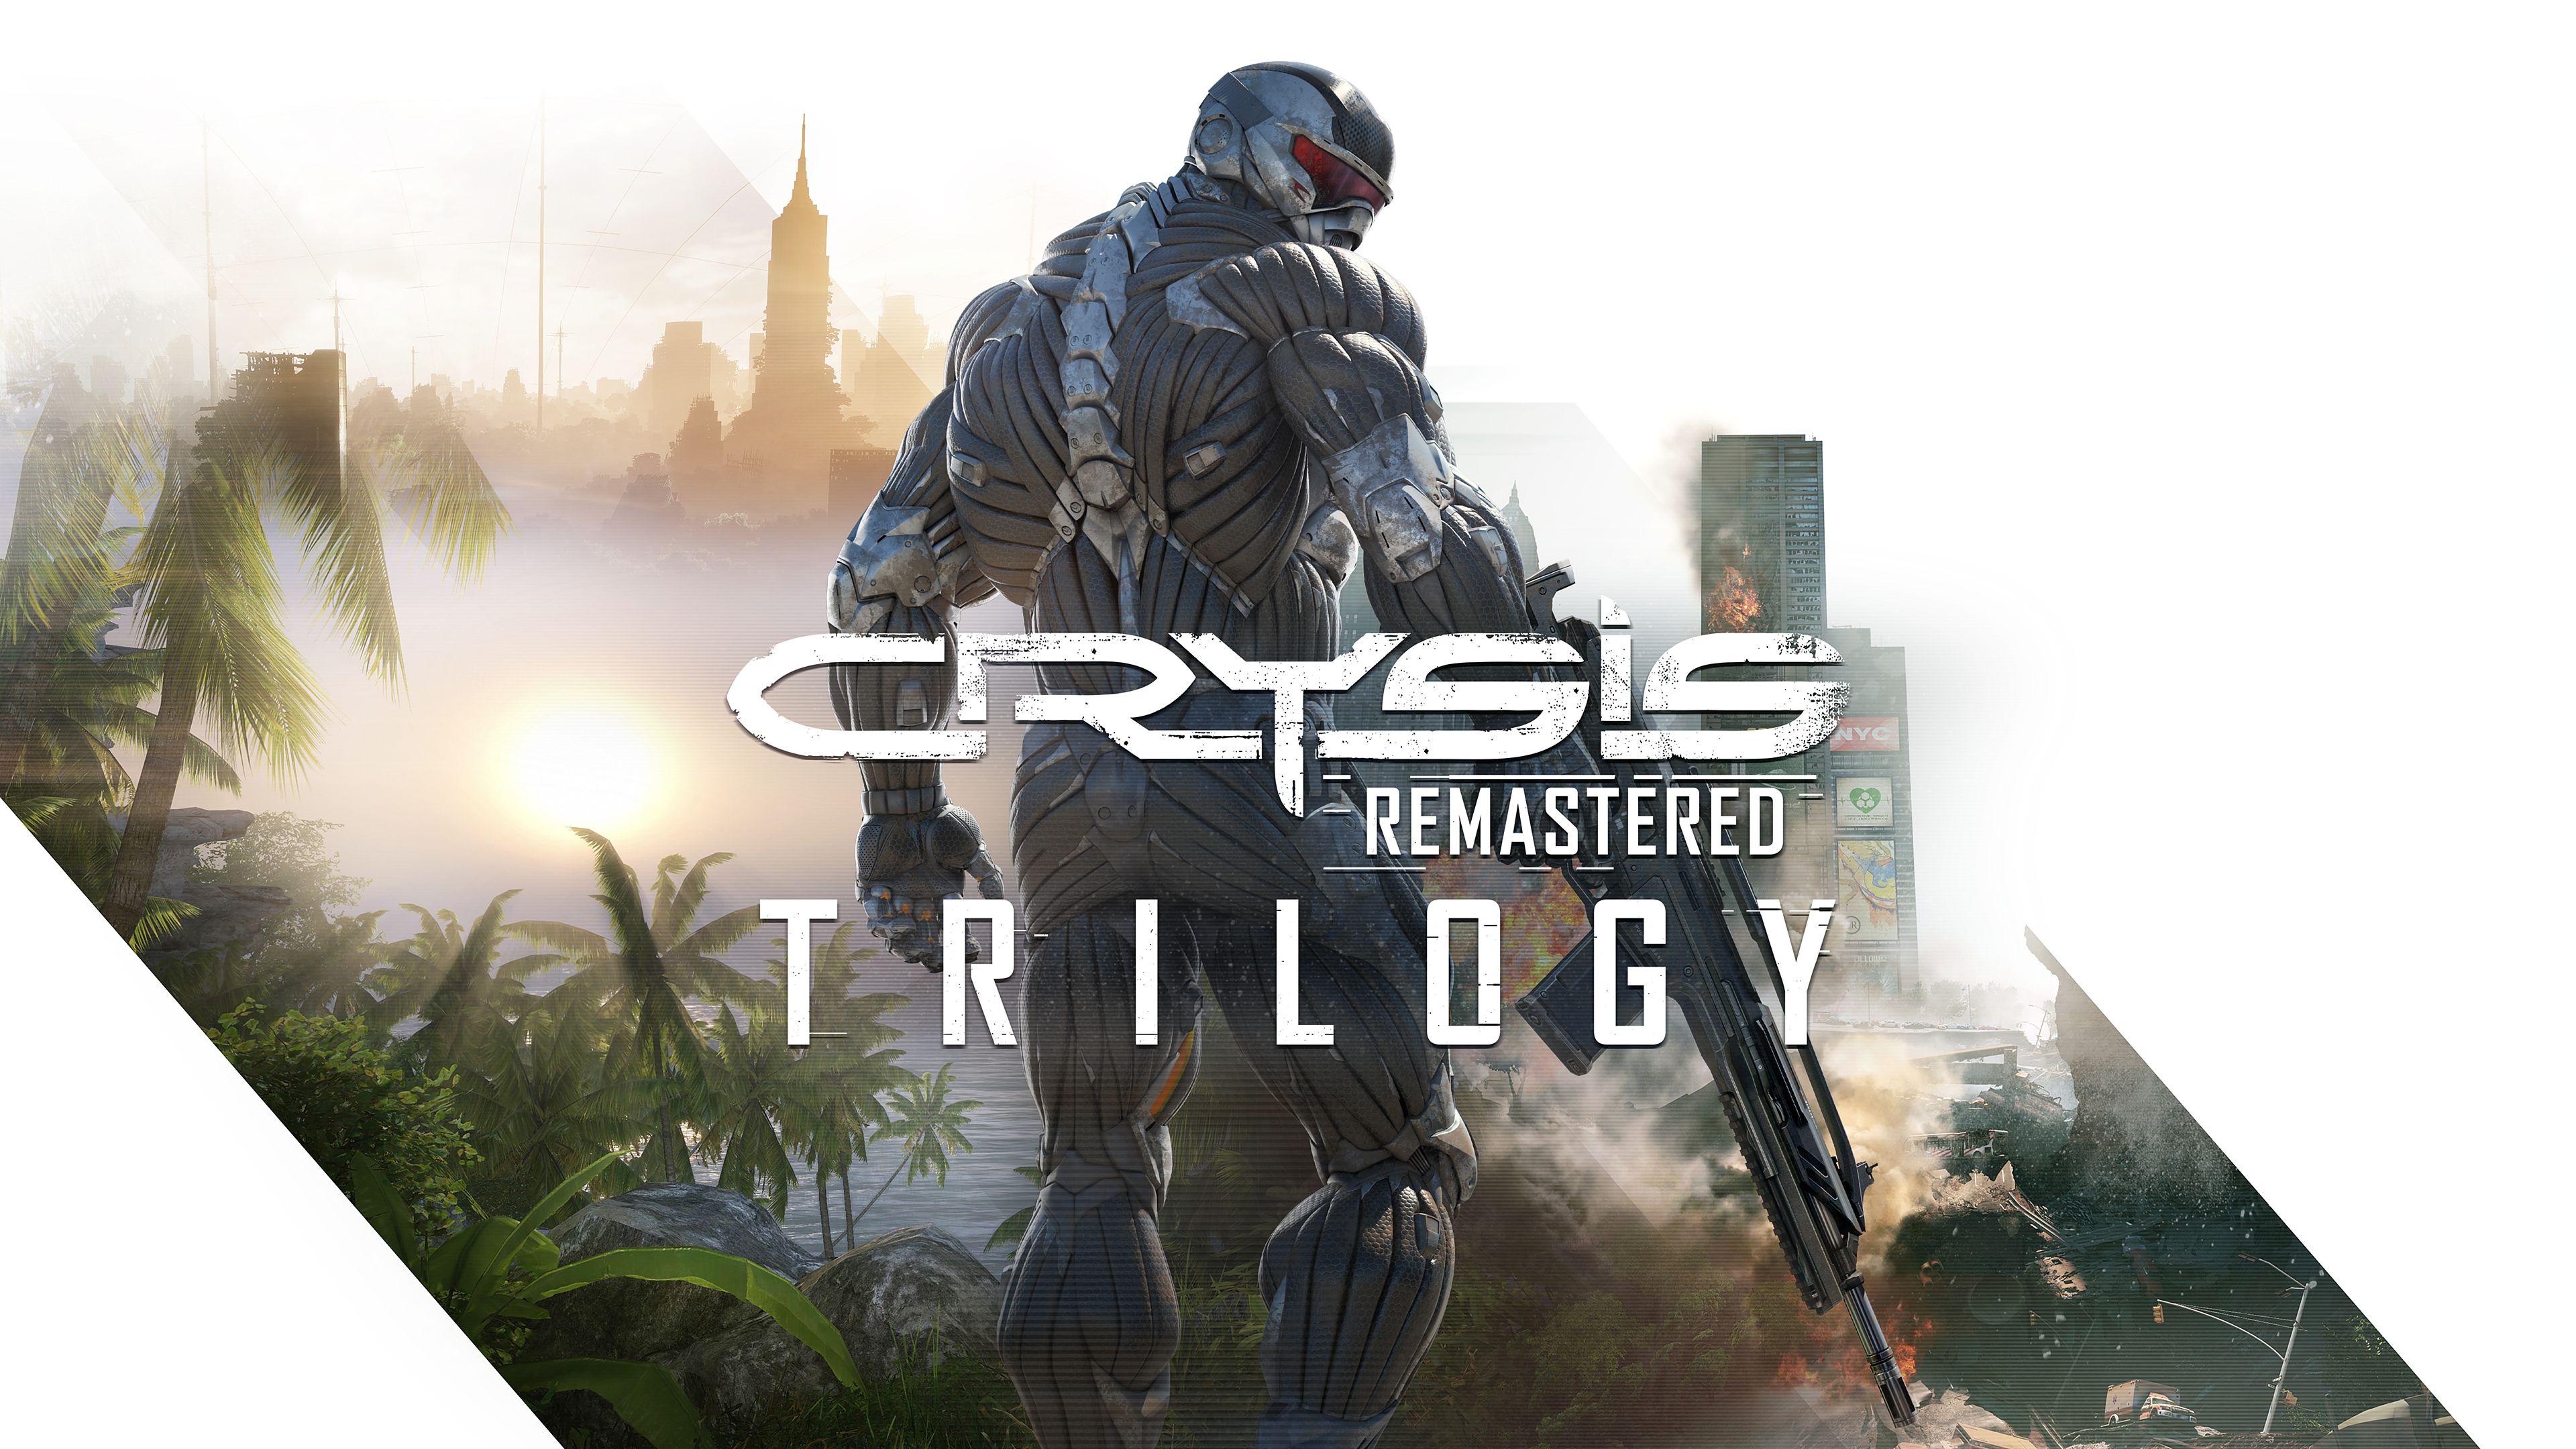 49 Awesome Will crysis remastered have multiplayer with Multiplayer Online